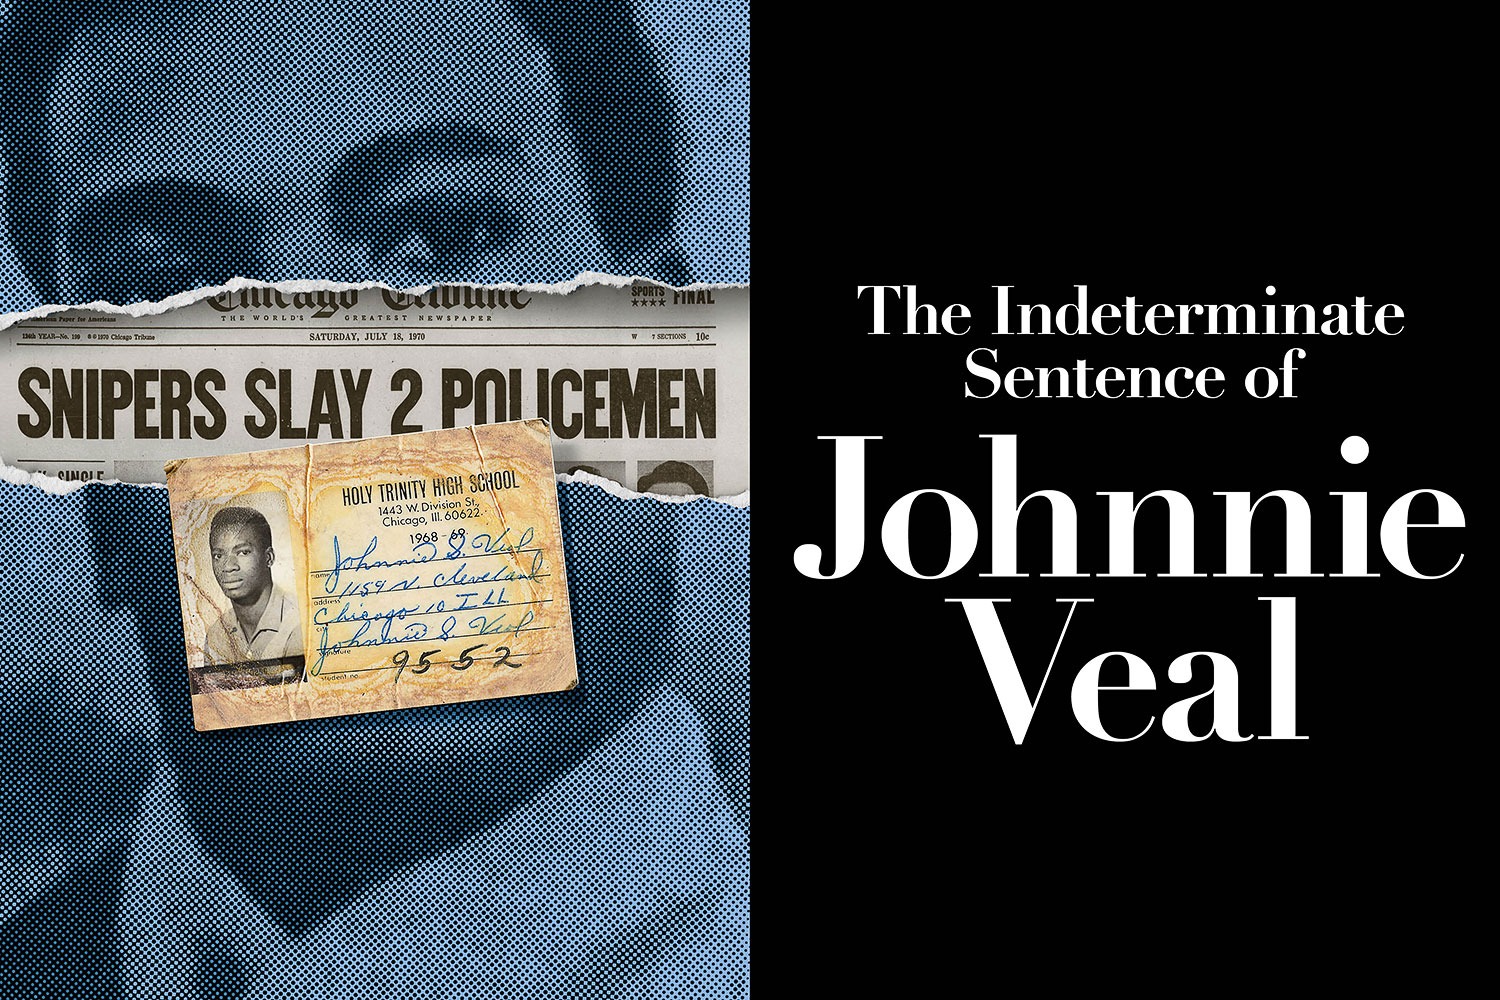 "The Indeterminate Sentence of Johnnie Veal" topper